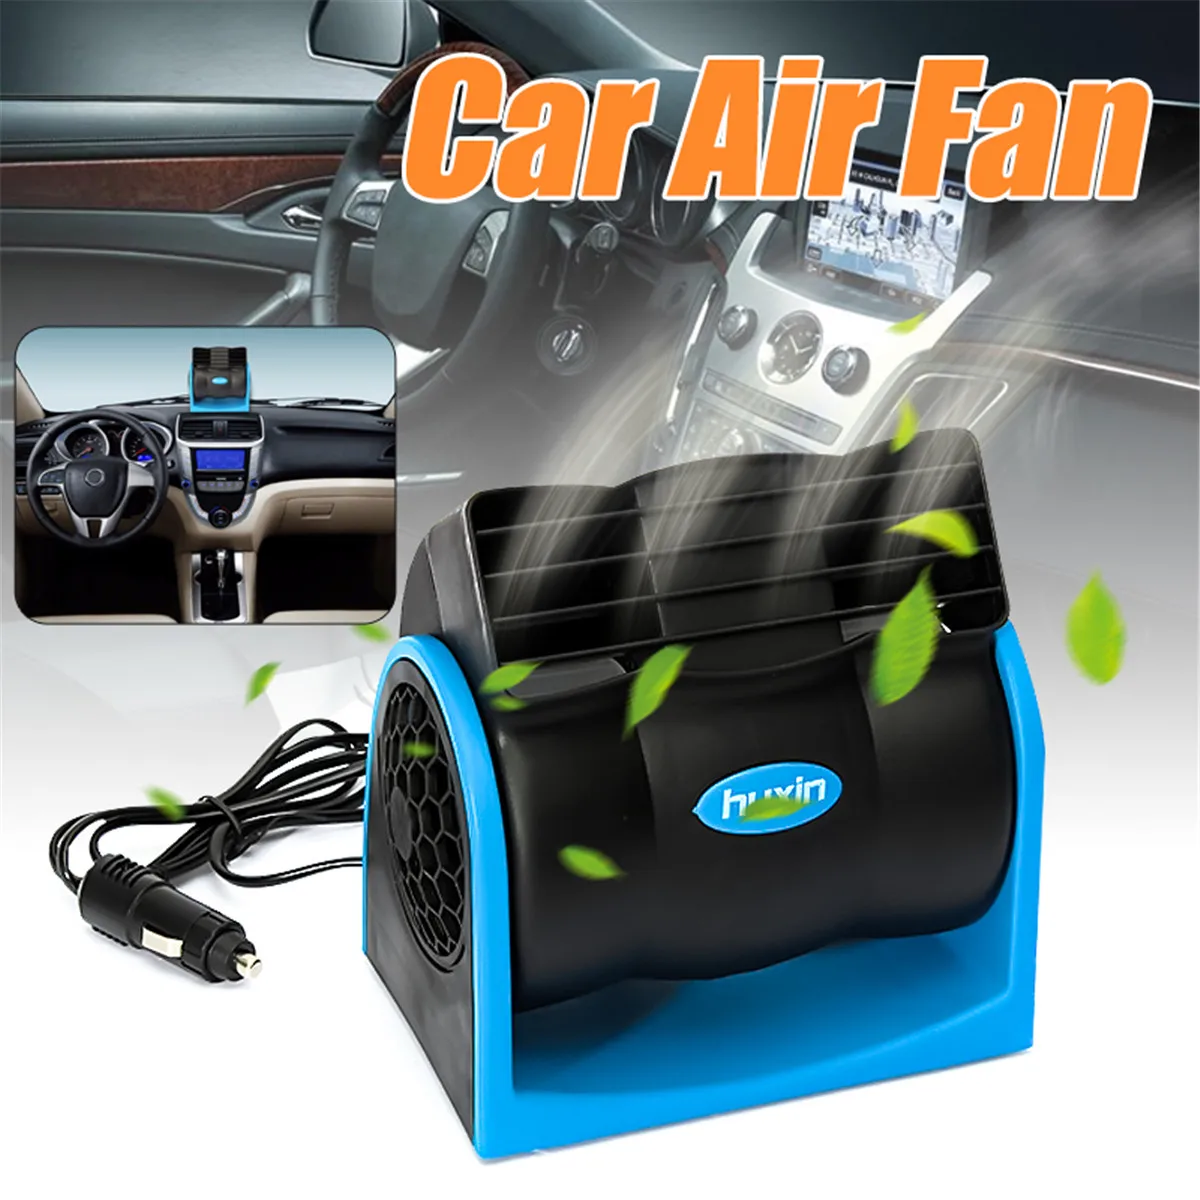 

12V Car Air Conditioner Vehicle Truck Boat Car Cooling Air Fan Speed Adjustable Silent Cool Cooler with Car cigarette lighter